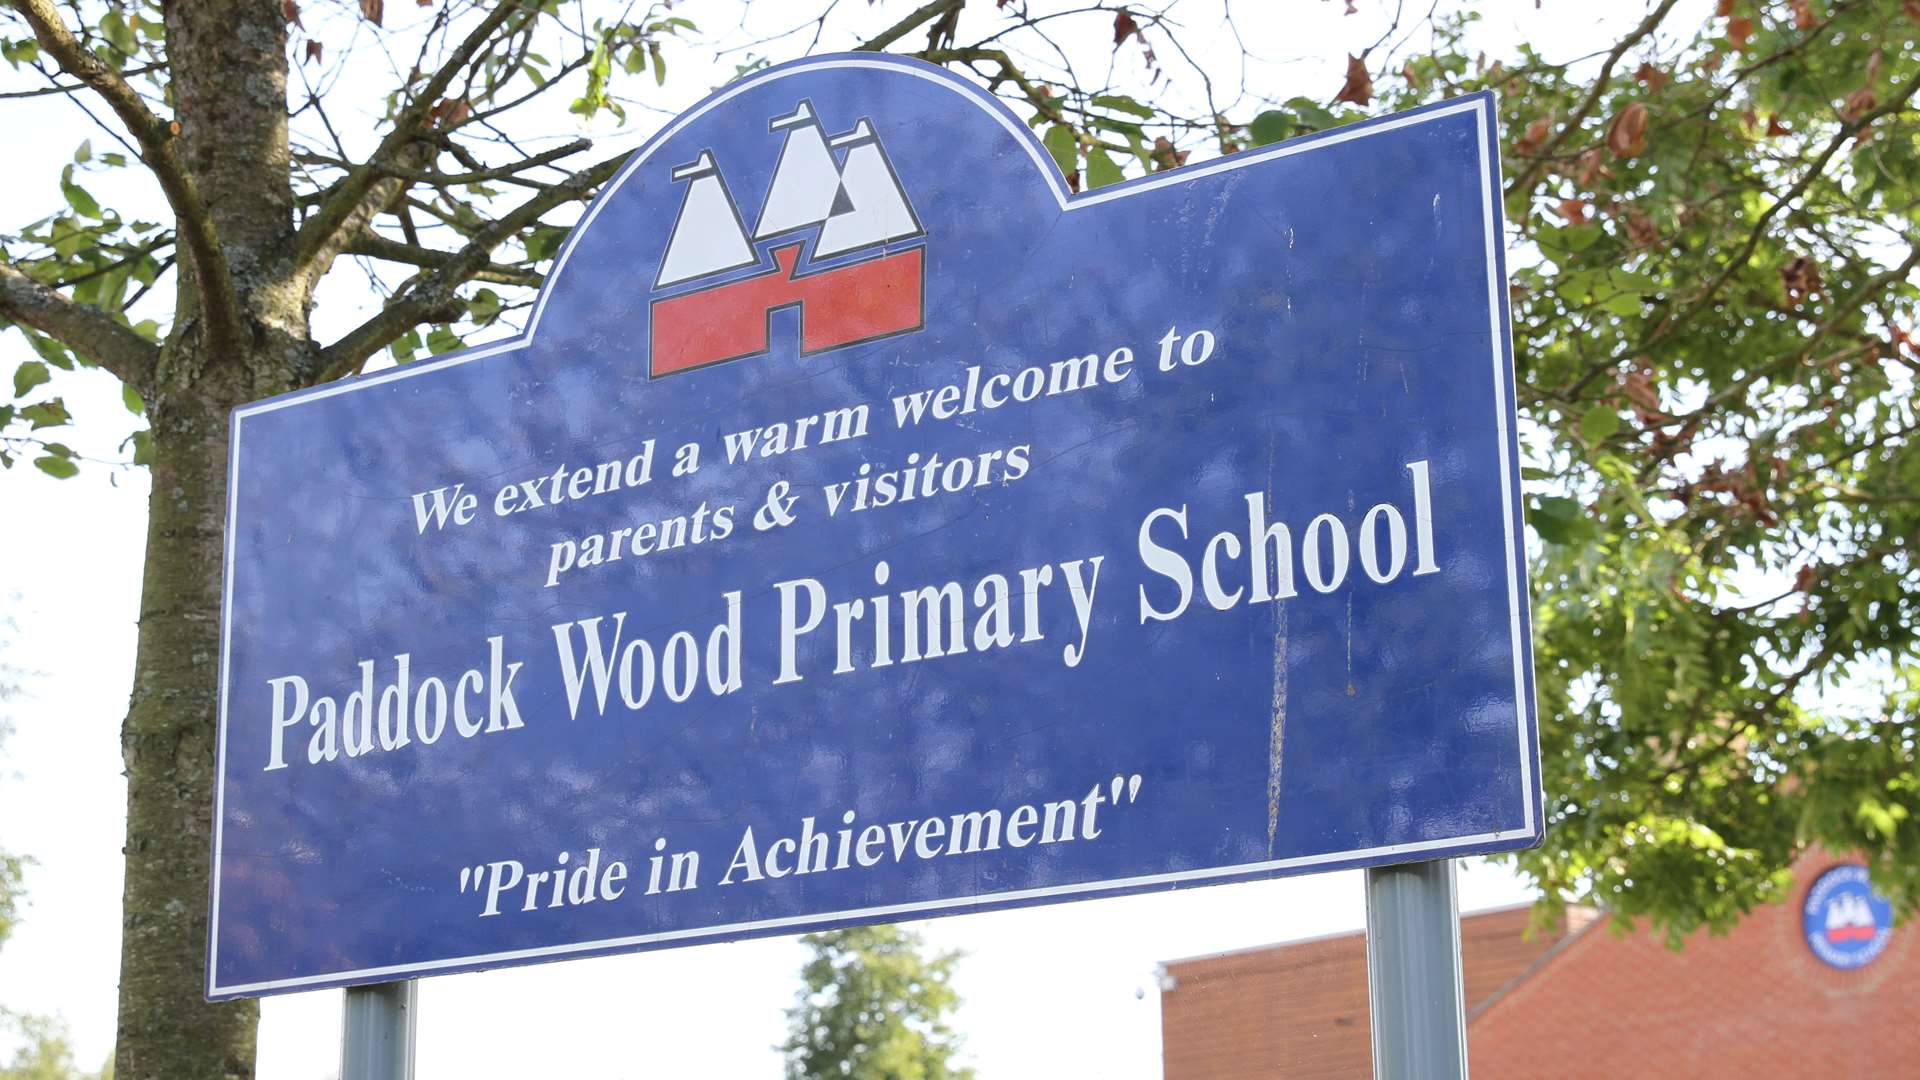 Paddock Wood Primary School is the only primary school in the town and it is feared demand for places will soon be too great unless a new school opens